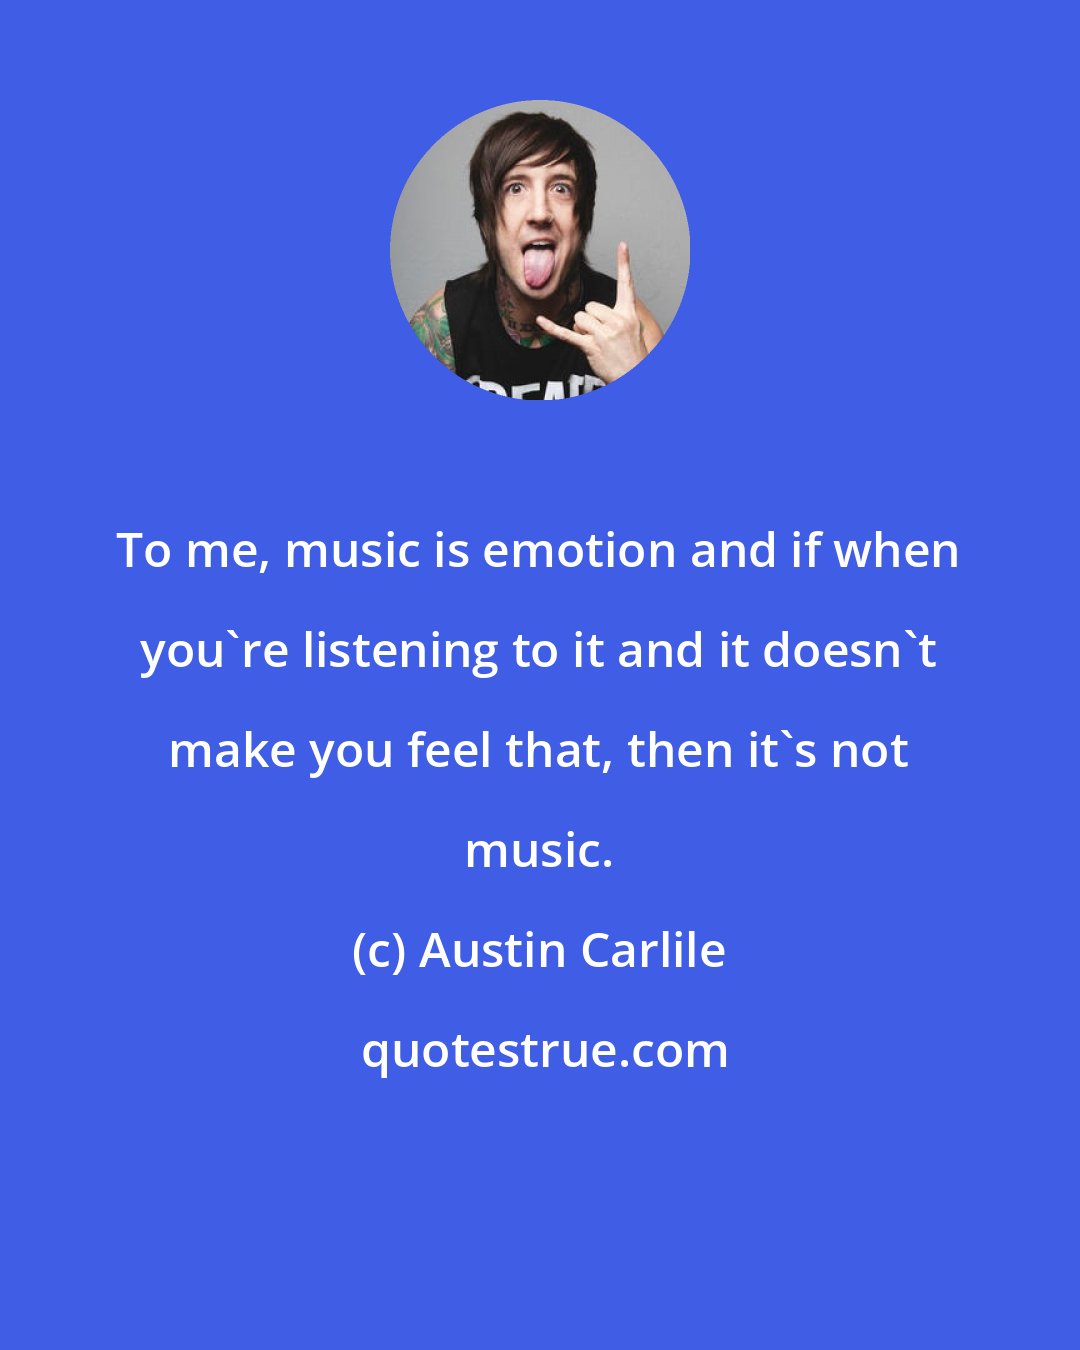 Austin Carlile: To me, music is emotion and if when you're listening to it and it doesn't make you feel that, then it's not music.